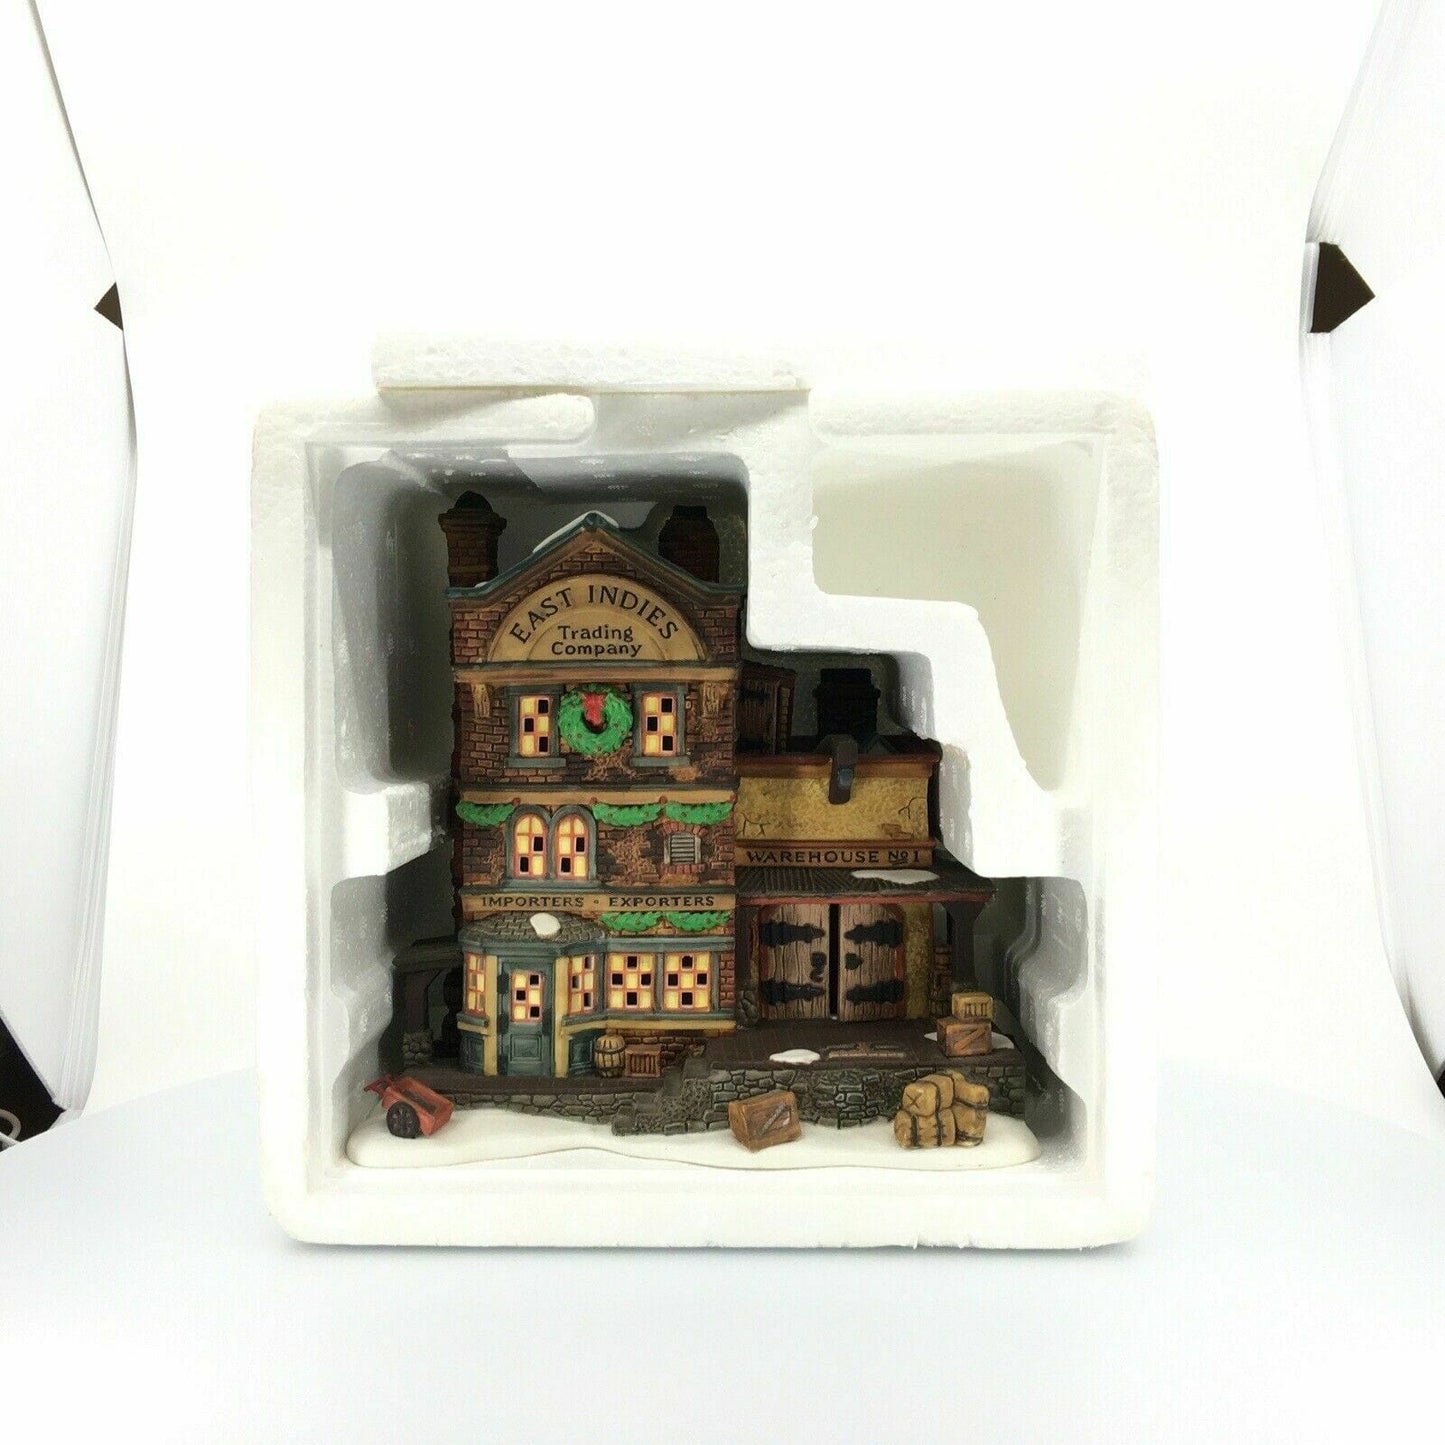 Dept 56 Dickens Village 1998 EAST INDIES TRADING CO. #58302 RETIRED